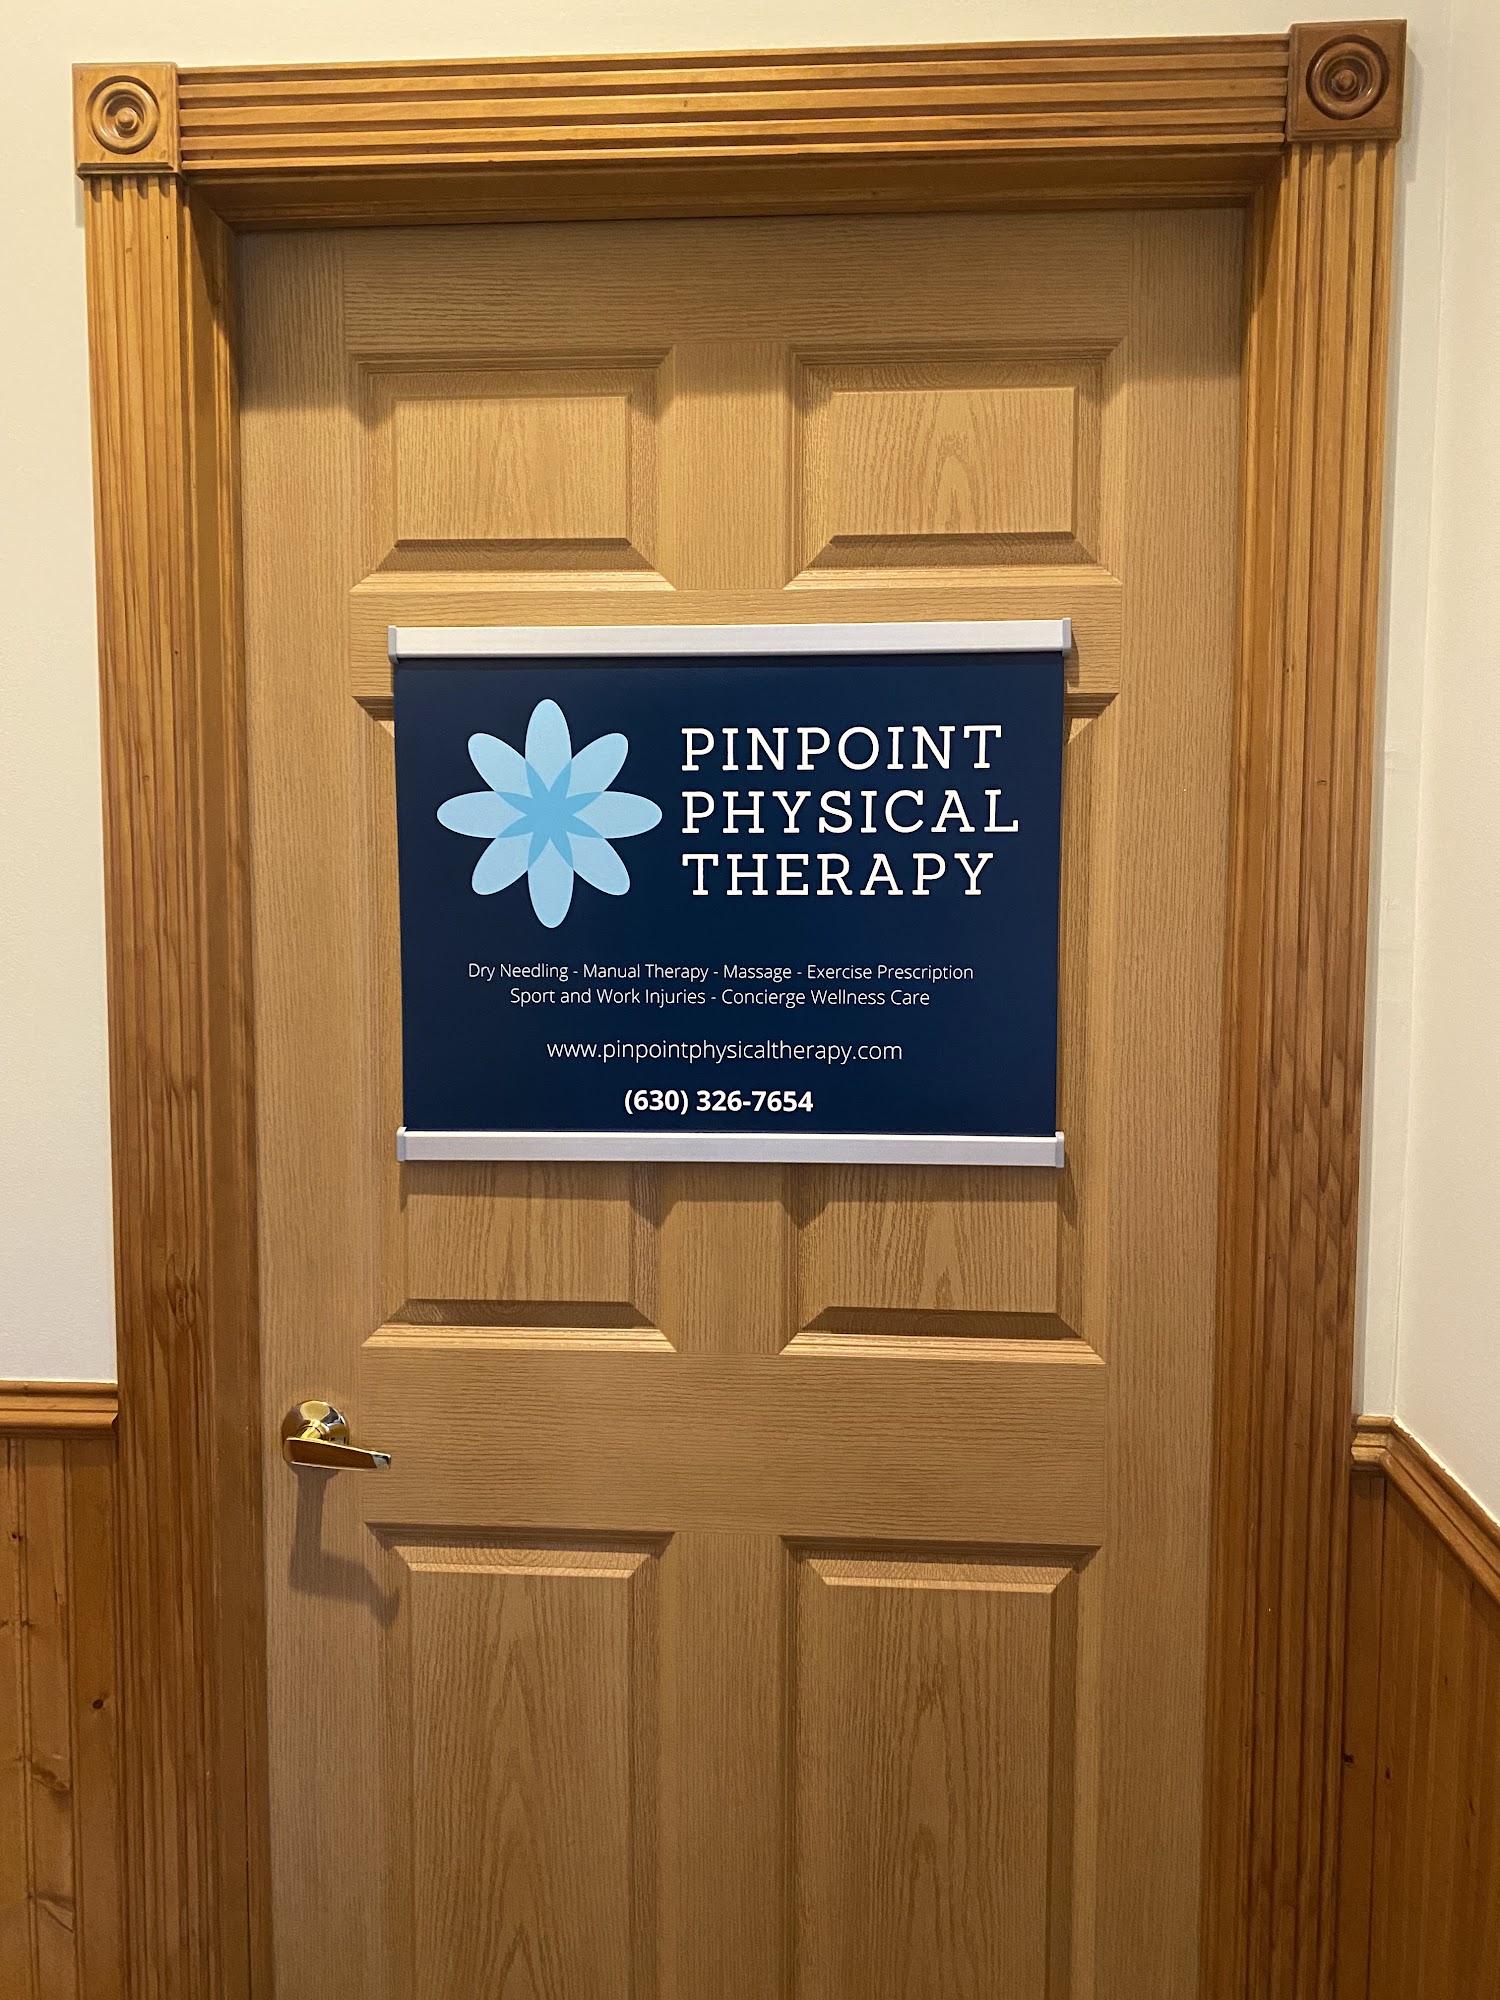 Pinpoint Physical Therapy, PLLC 212 Webster St, Montgomery Illinois 60538